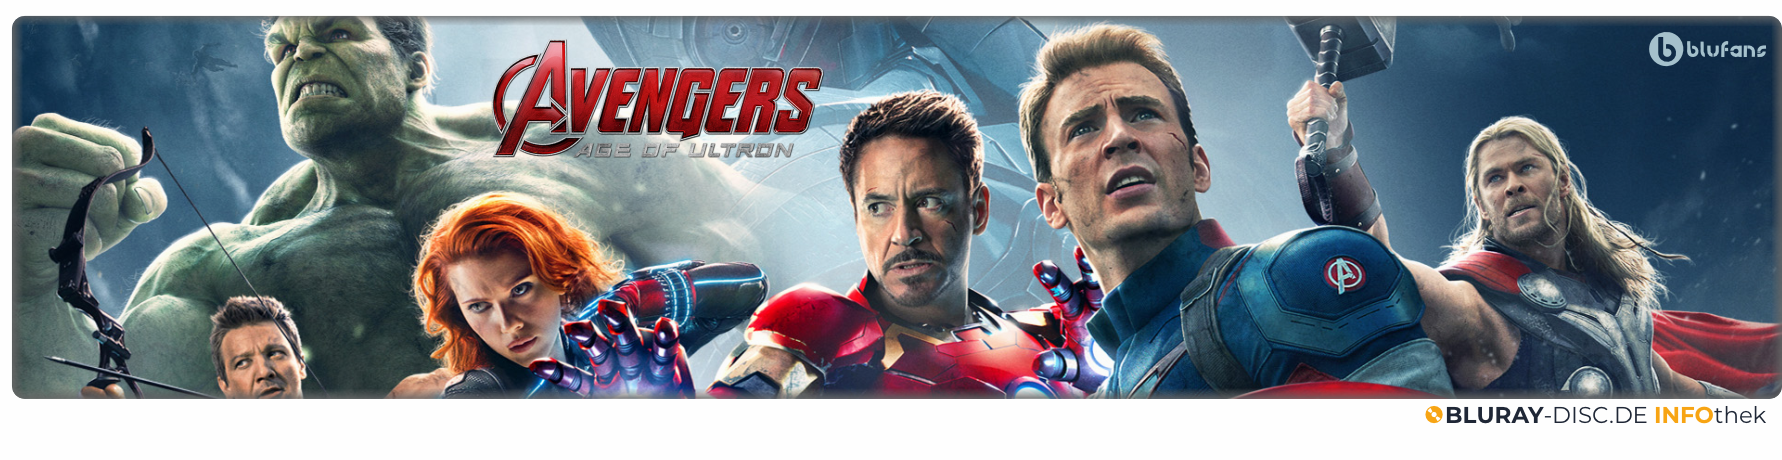 Moviebanner_Blufans_Avengers_Age_of_Ultron.png